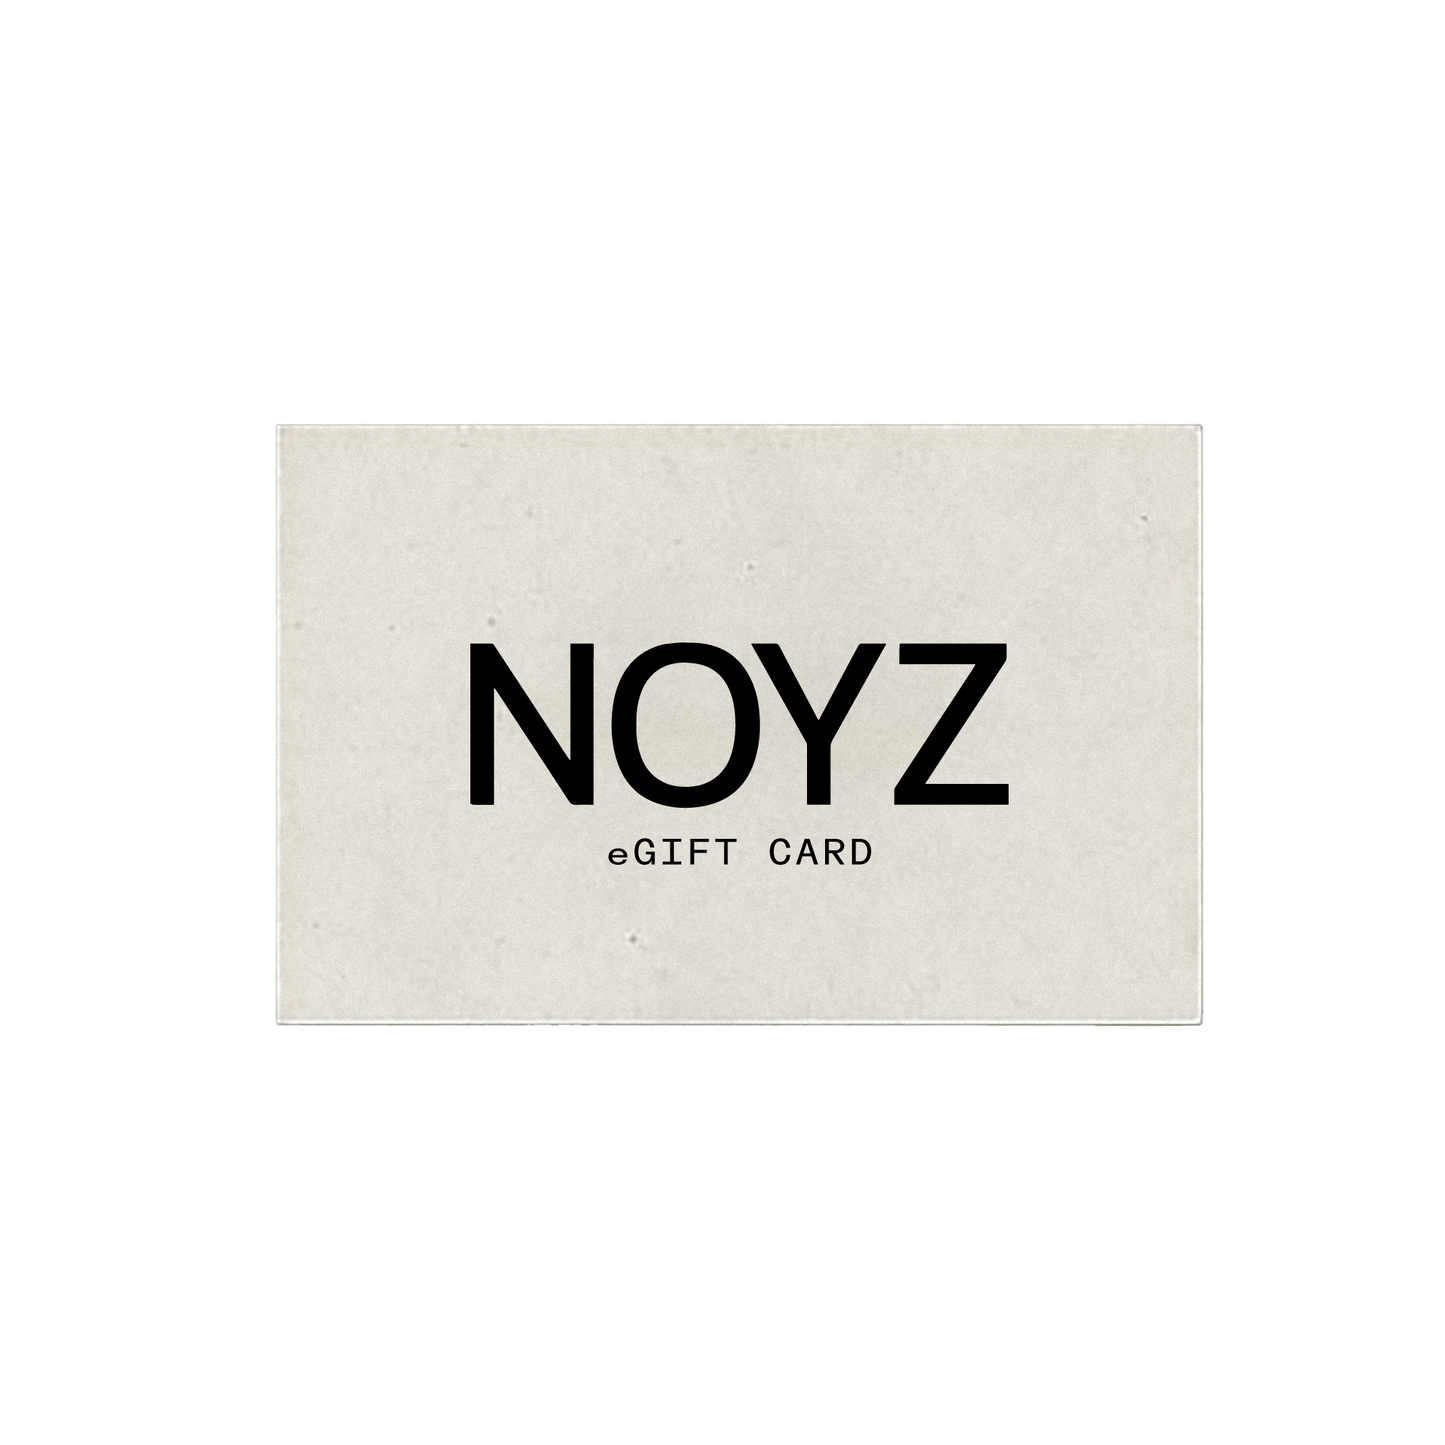 A NOYZ gift card for purchasing top unisex fragrances made of textured beige paper sits on a light beige background